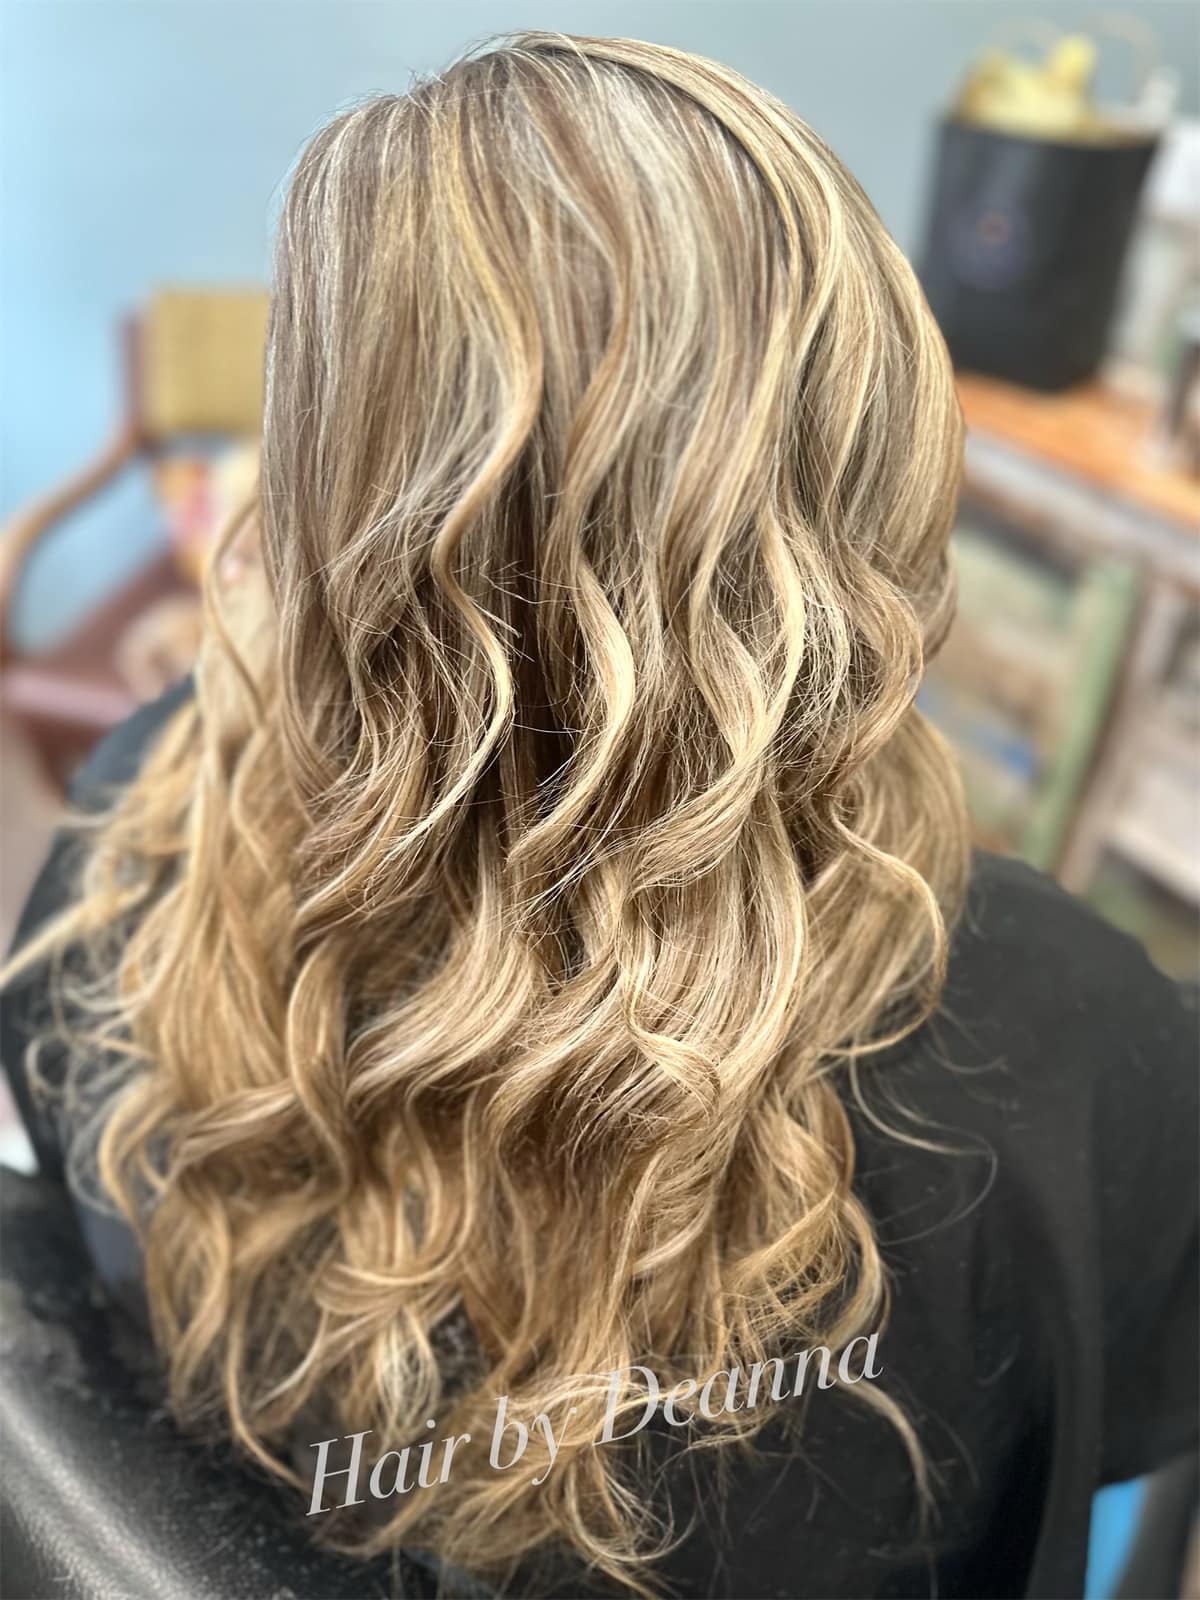 Hair by Deanna Lance 89 Mears Dr, Woodbury Tennessee 37190